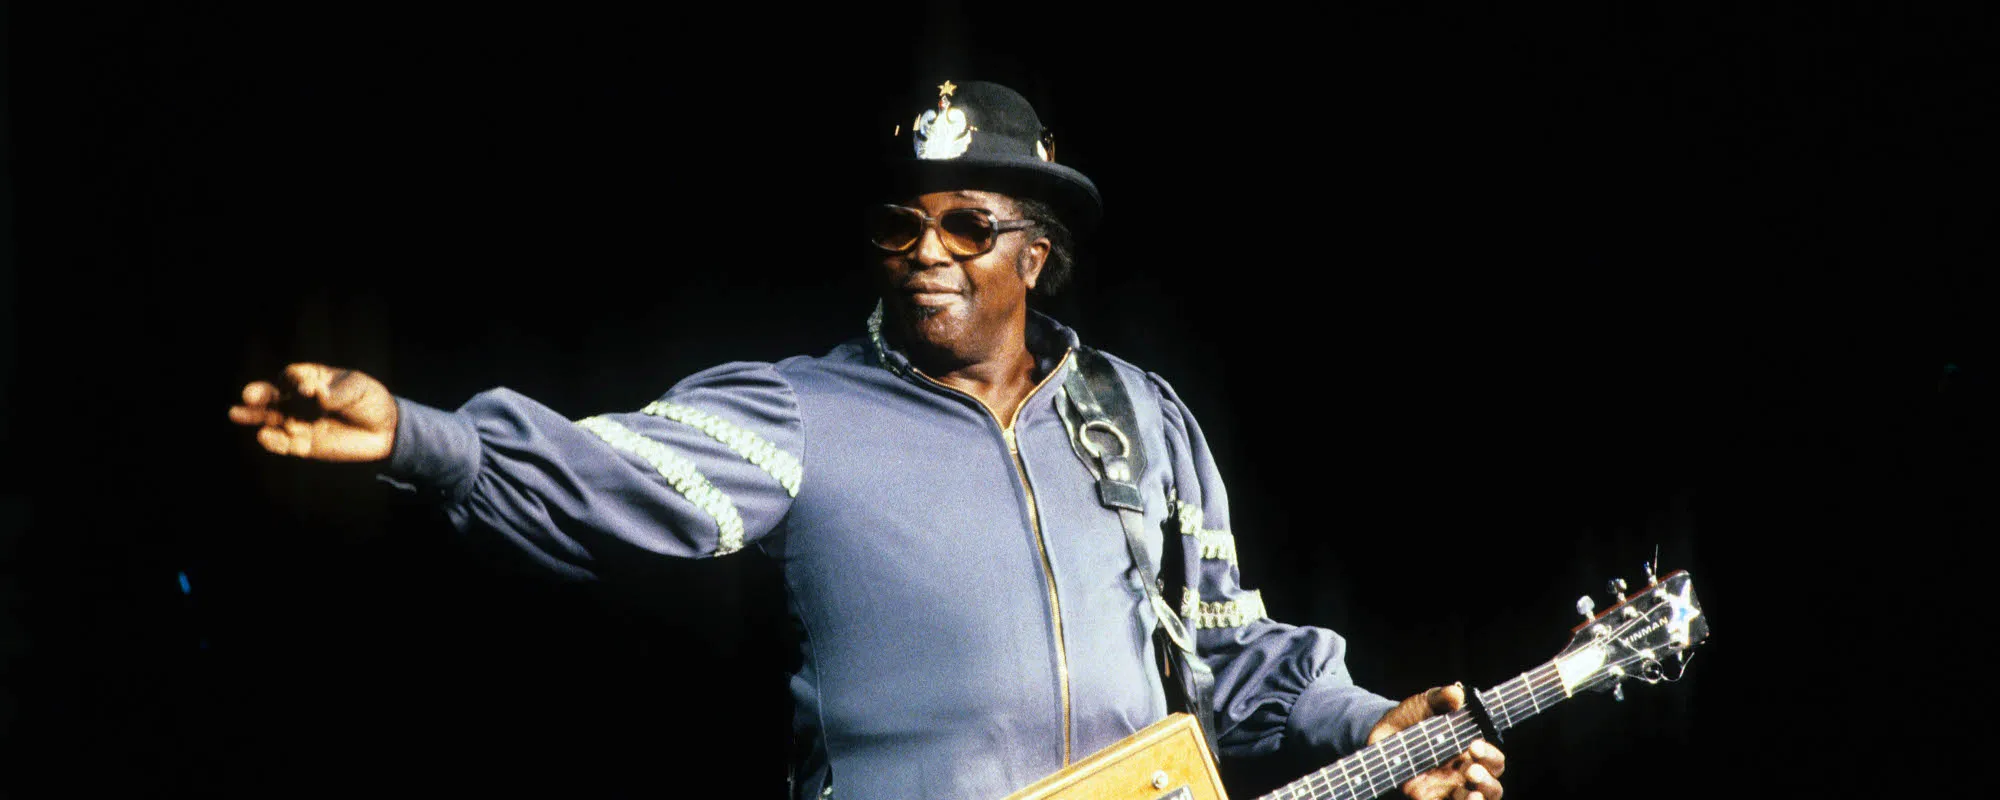 10 Songs That Use the “Bo Diddley Beat”